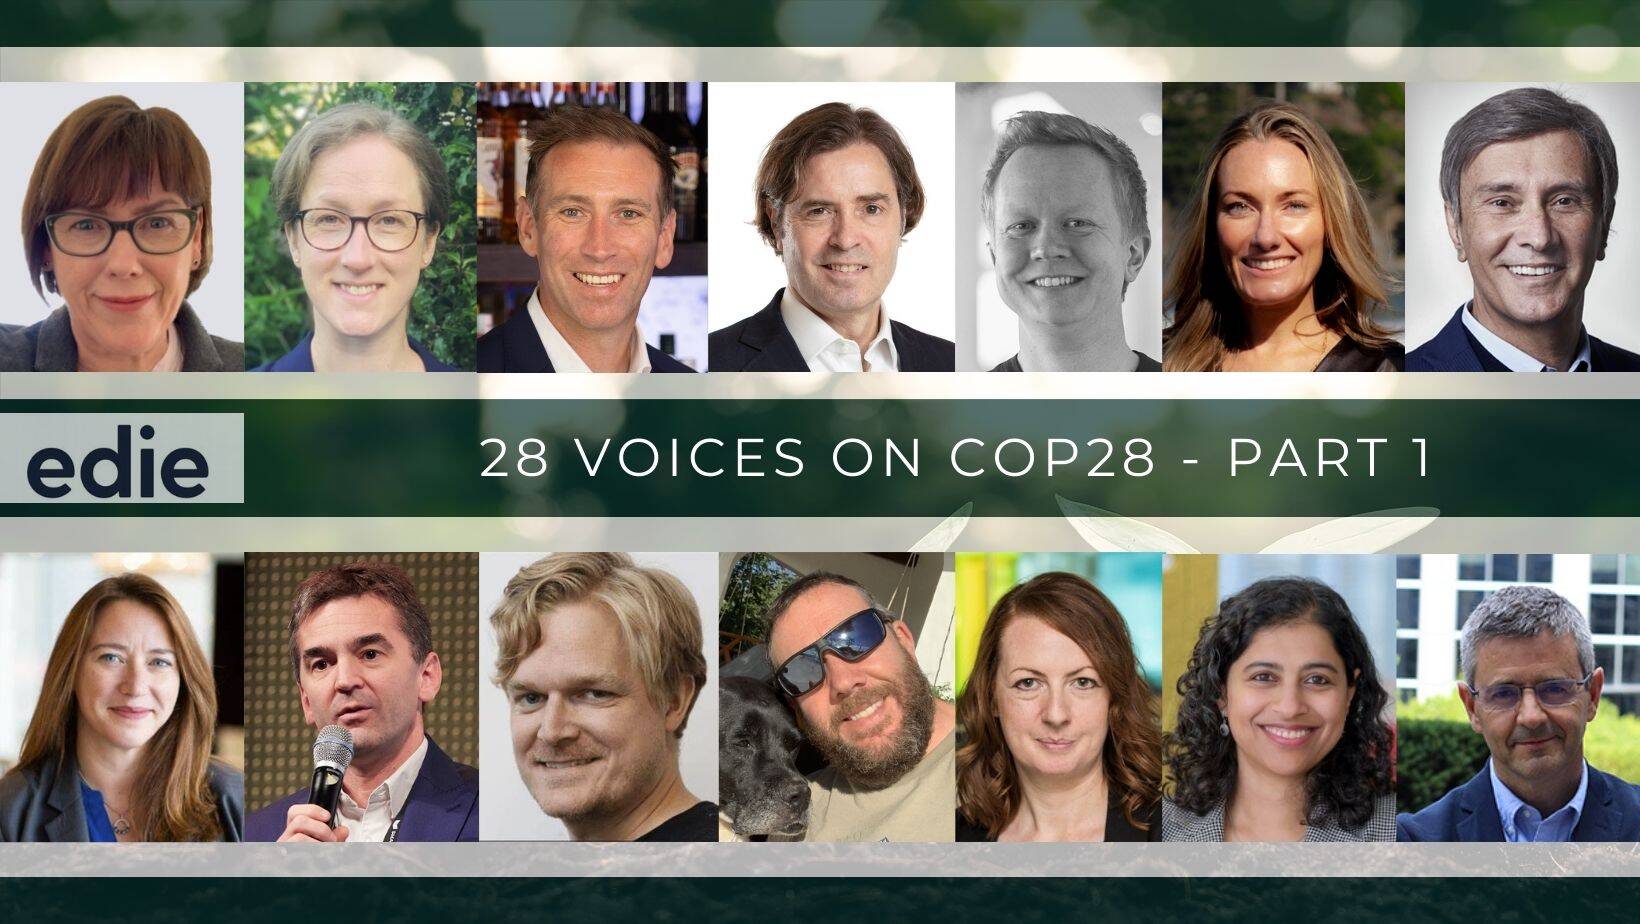 28 voices on COP28: What we want from the climate summit (part 2)